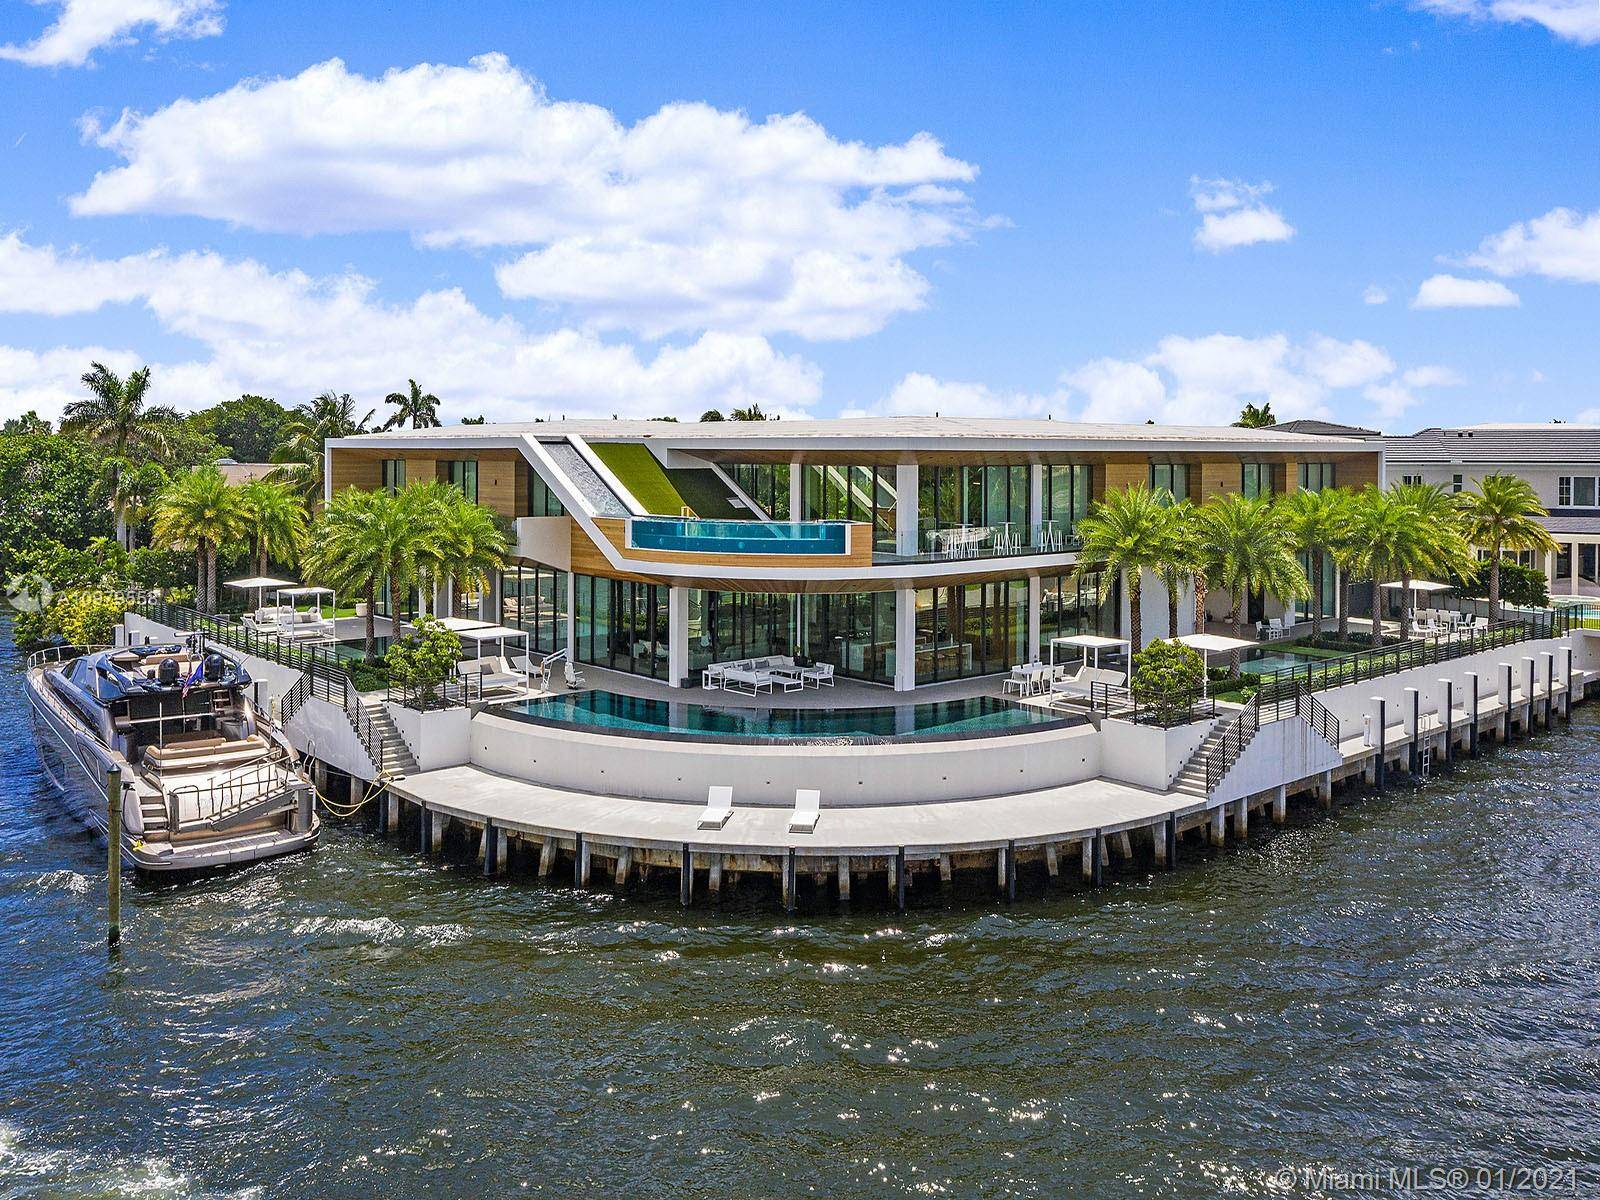 A fresh departure from expected Boca Raton luxury, this spectacular contemporary residence on an oversized Intracoastal Waterway lot offers 343 feet of water frontage and 270 degree views.